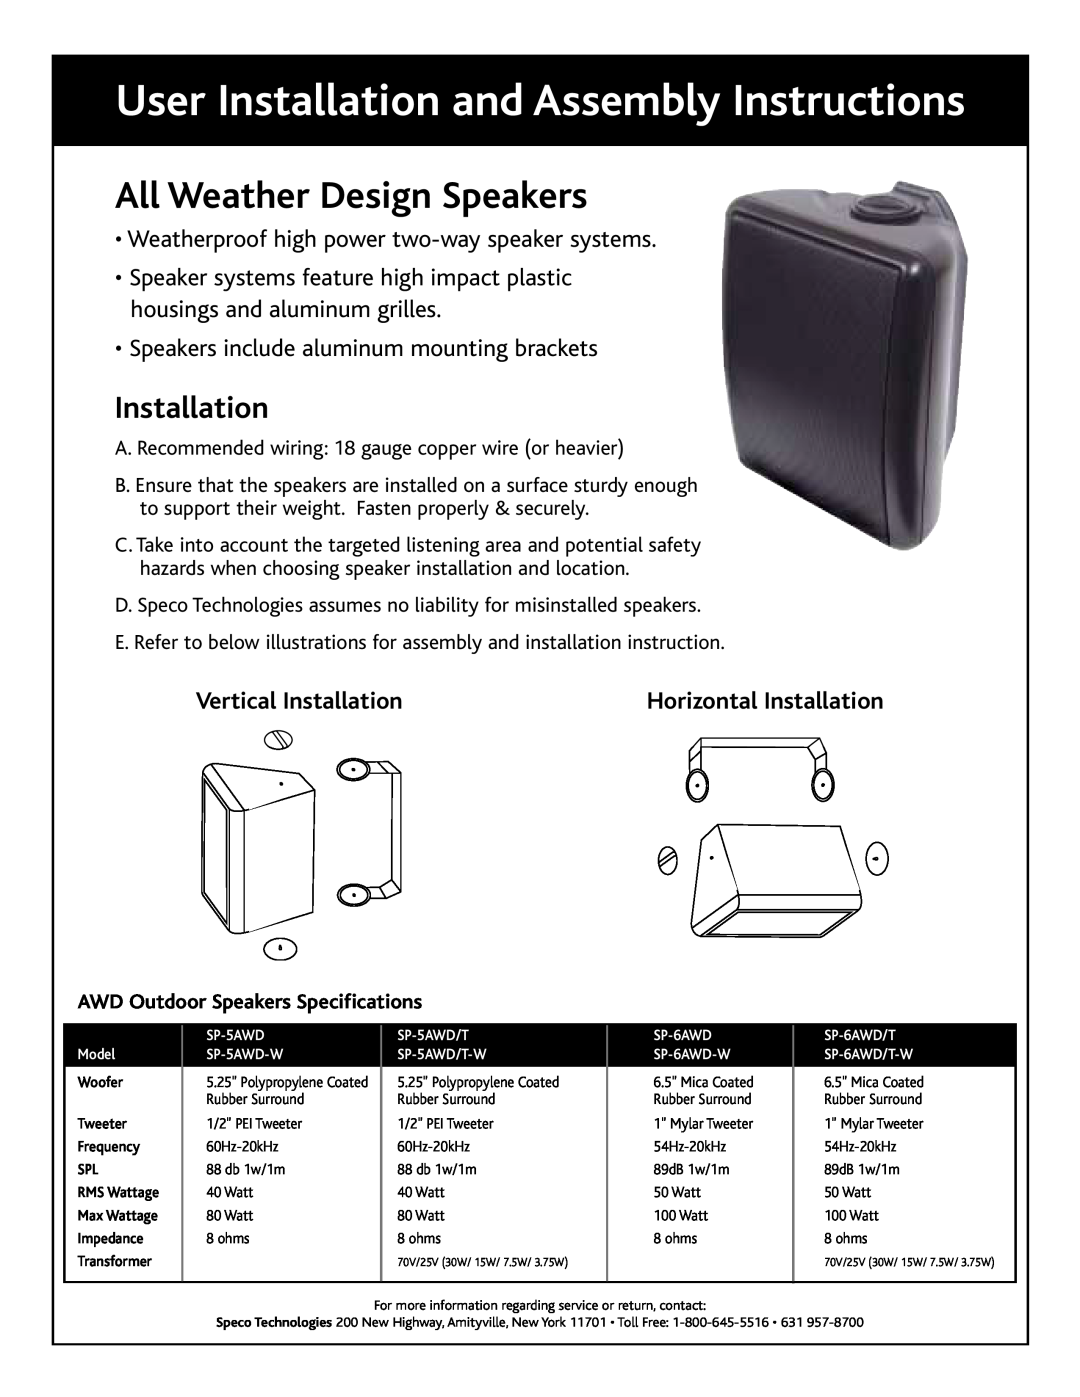 Speco Technologies SP-5AWD specifications User Installation and Assembly Instructions, All Weather Design Speakers, Model 